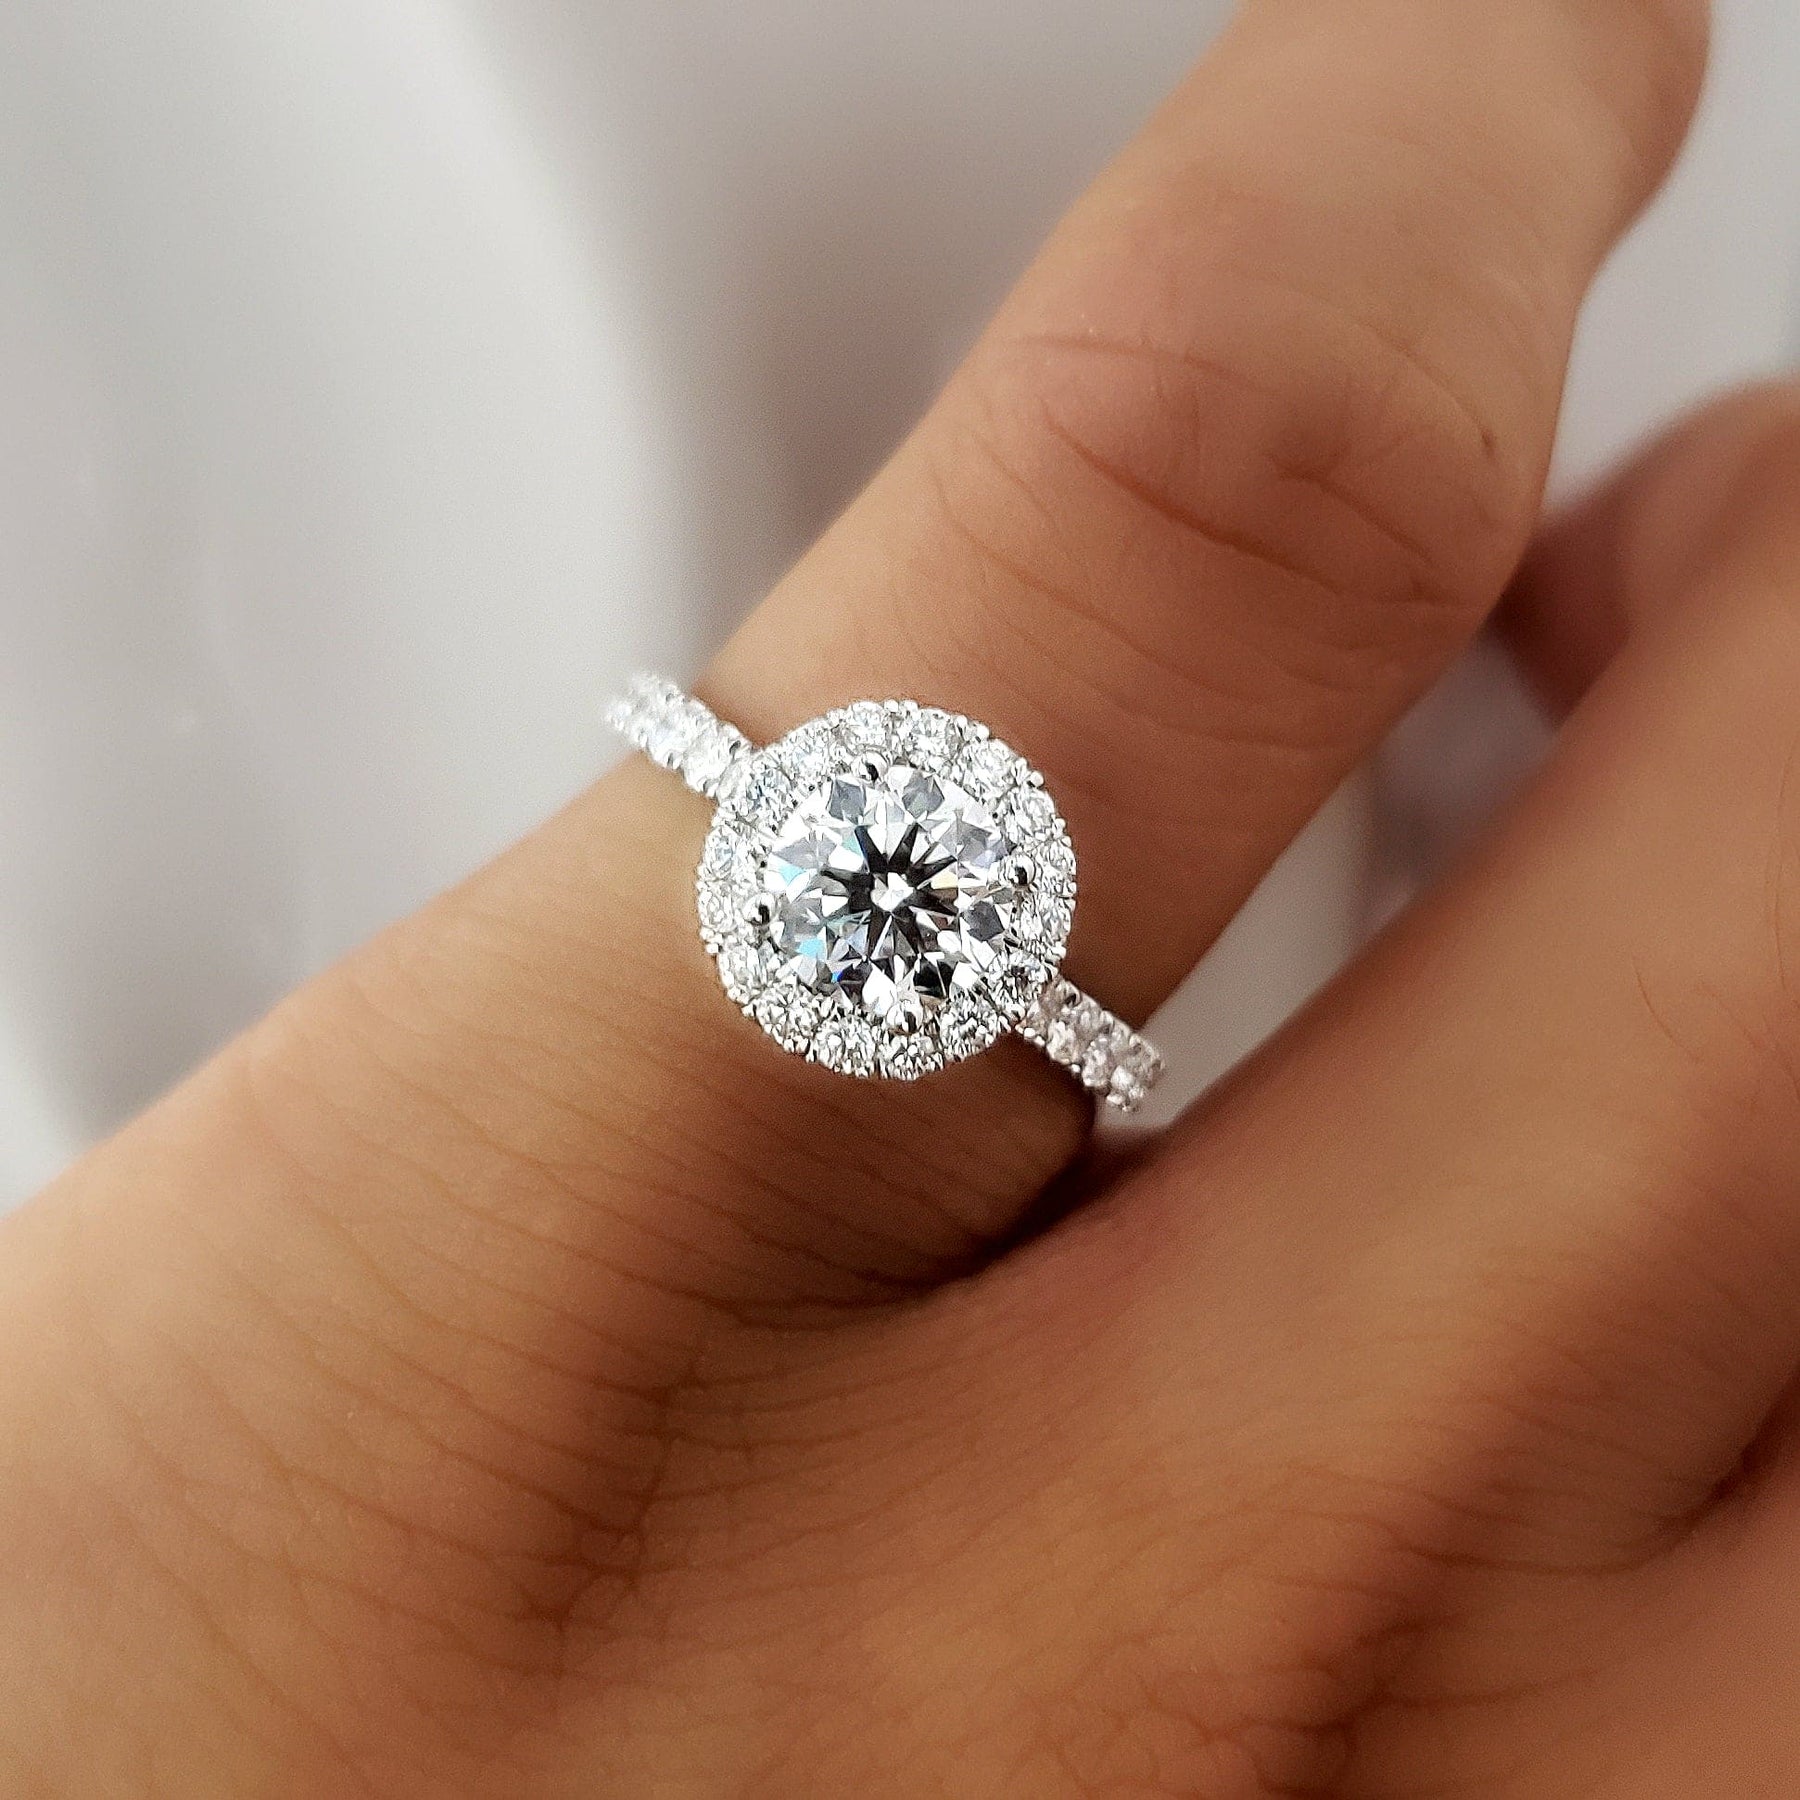 1 Carat Diamond Rings: A Price Guide And Where To Buy Them